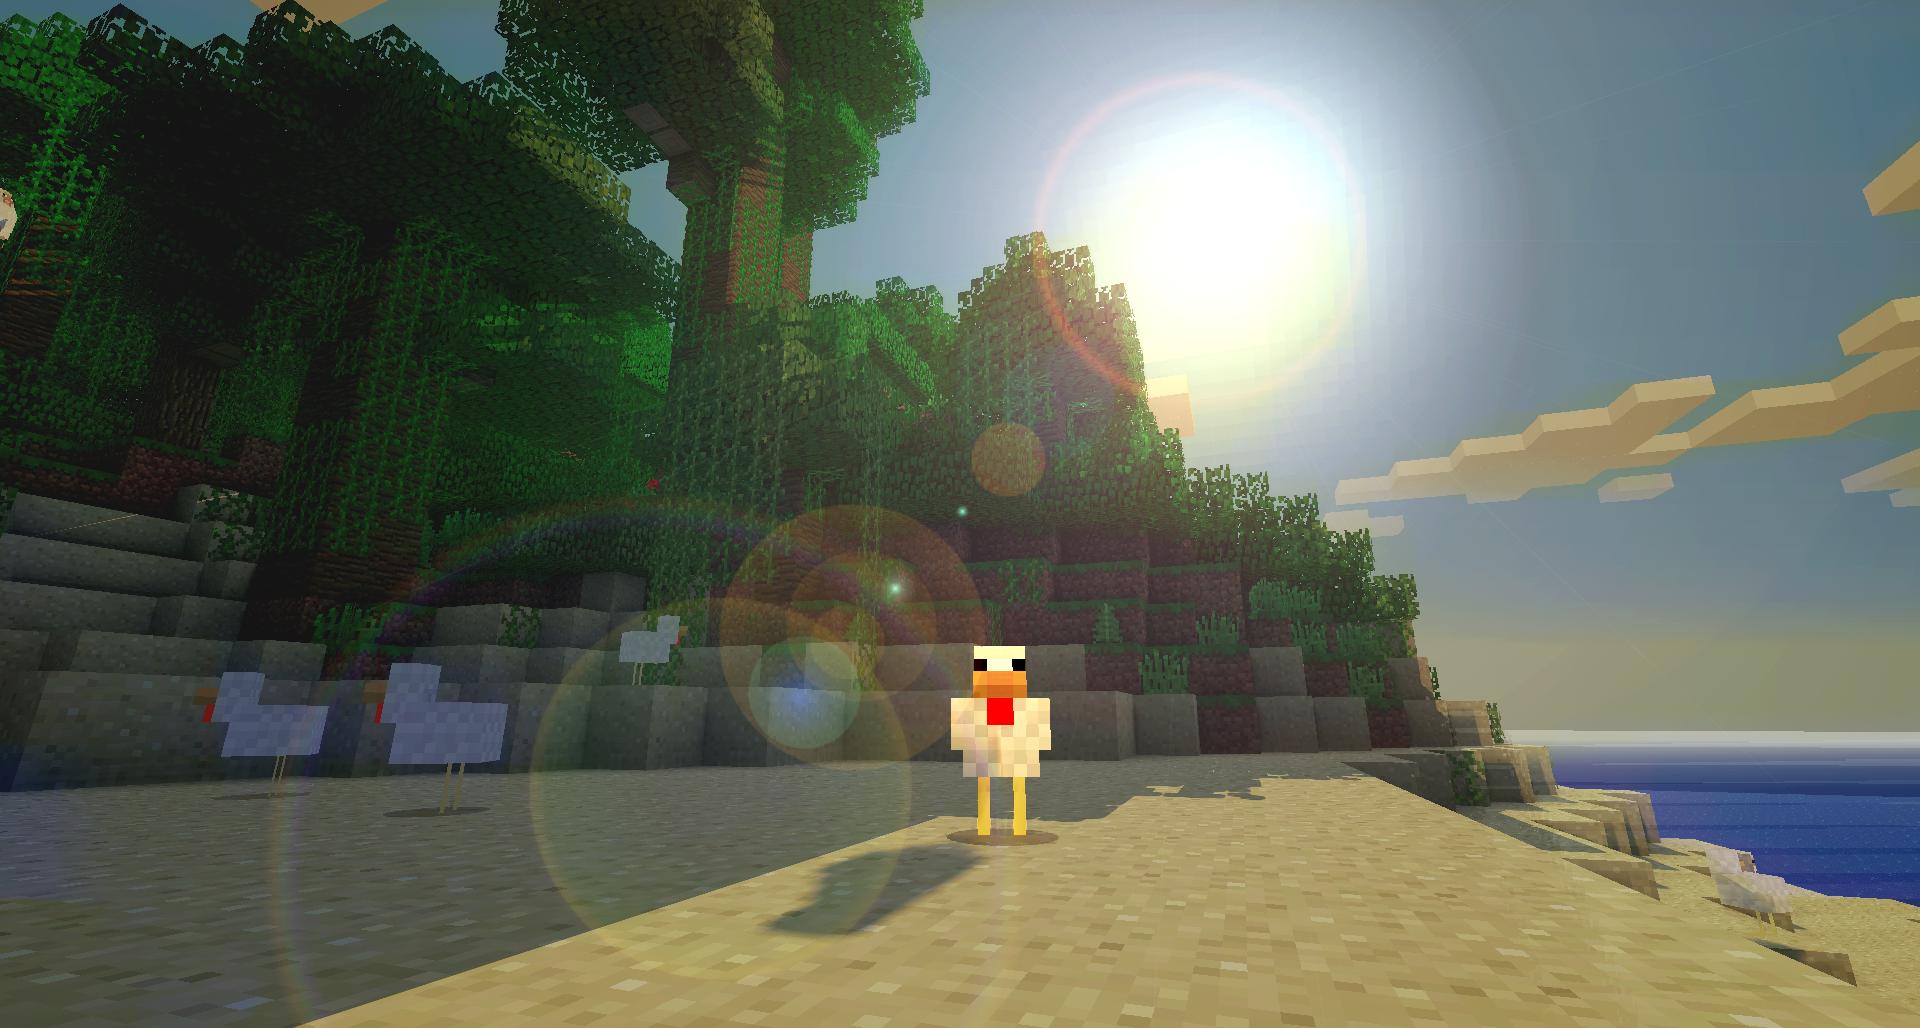 Shaders mod + a bit of photoshop = amazing yet simple background ...